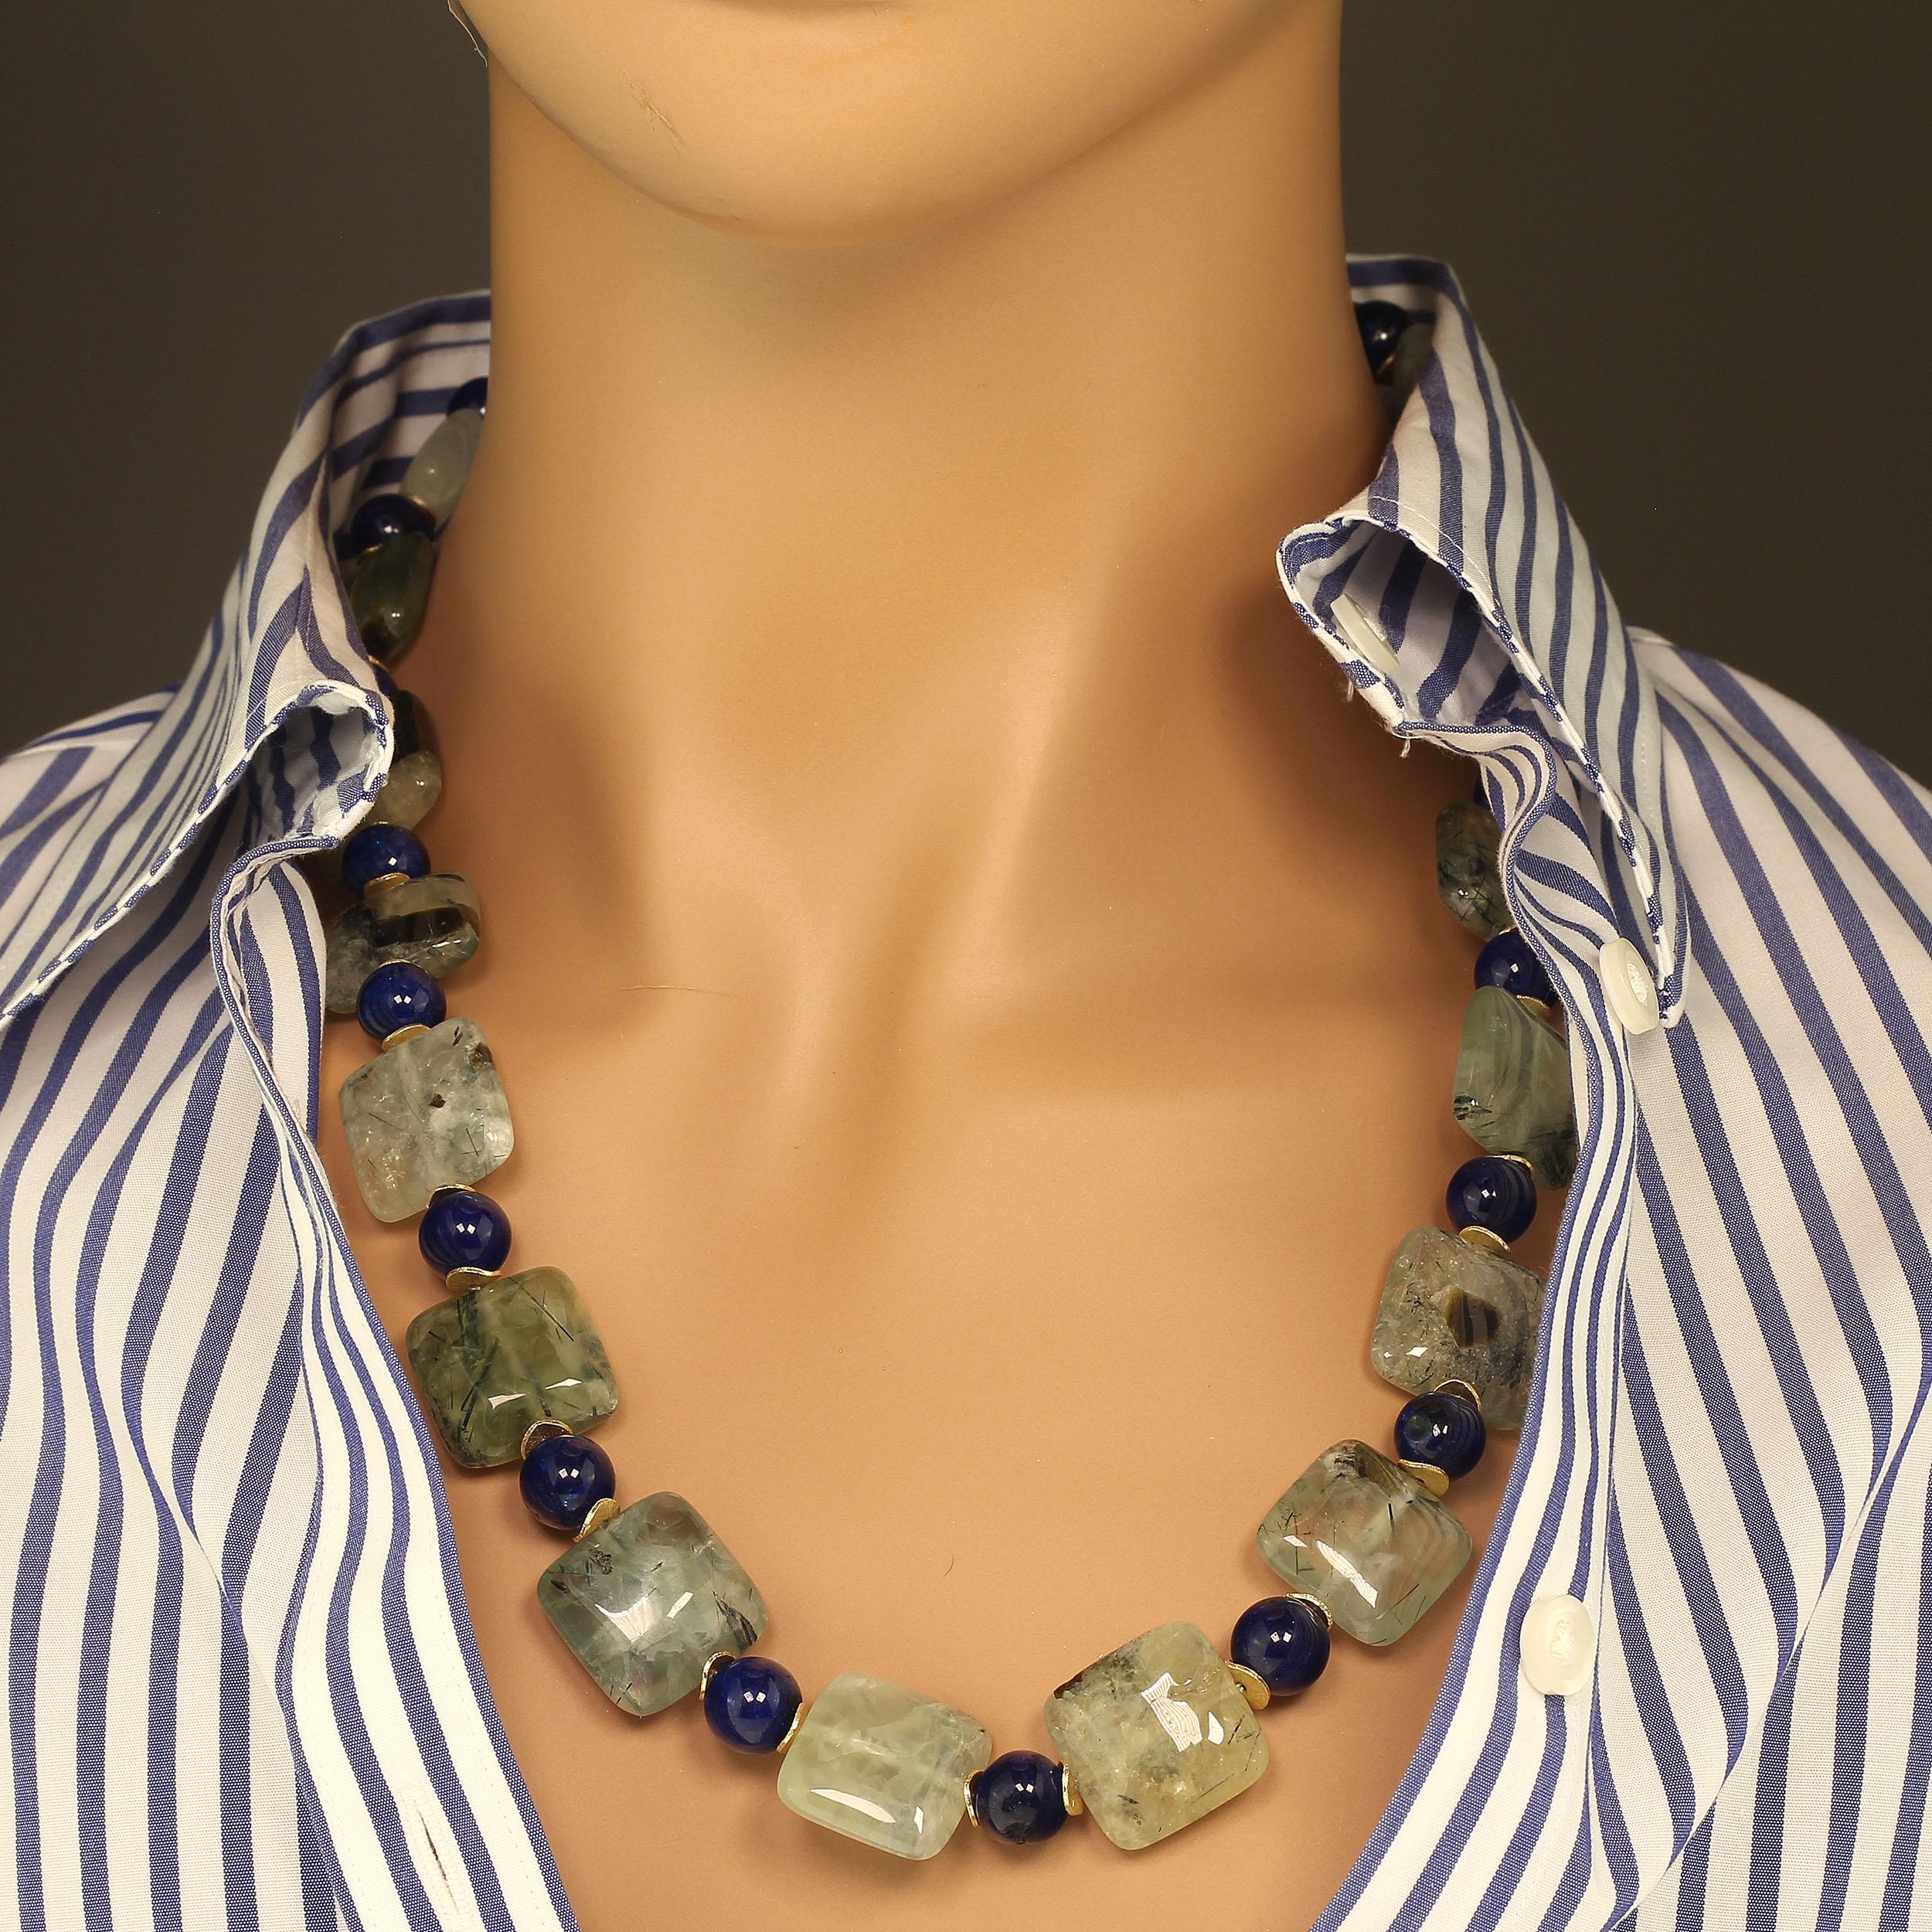 Long elegant necklace of Prehnite and blue Agate. This unique 24 inch necklace of square tablets of glowing green Prehnite combined with highly polished 10 MM dyed blue Agate is a delight to wear. We are happy to say that this gorgeous Prehnite